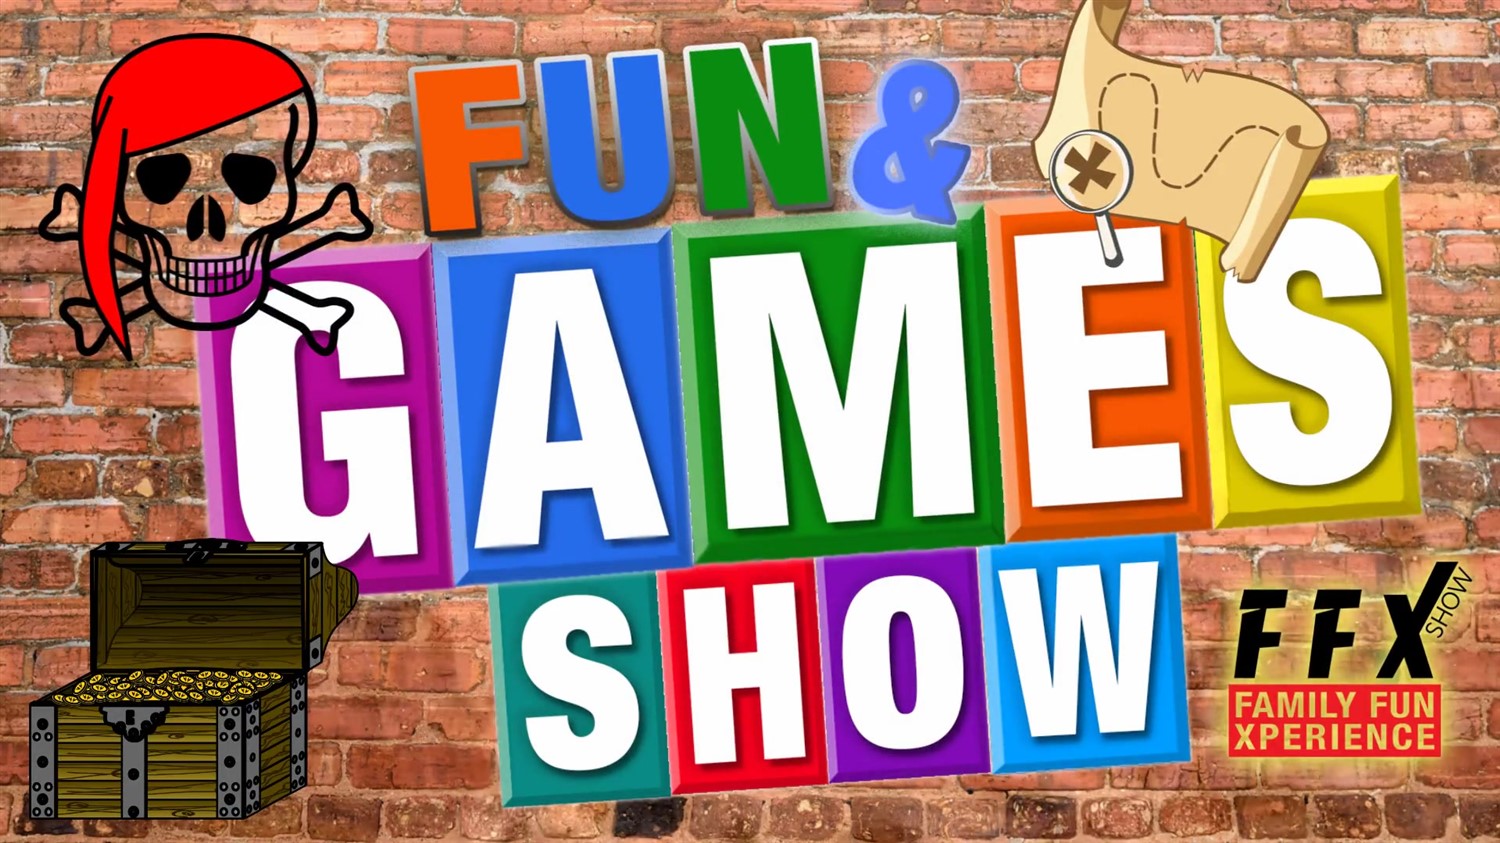 PIRATE FUN & GAMES SHOW Join the Foggy FoX pirates! on Jul 06, 19:00@FFX Theatre - Pick a seat, Buy tickets and Get information on Family Fun Xperience tickets.ffxshow.org